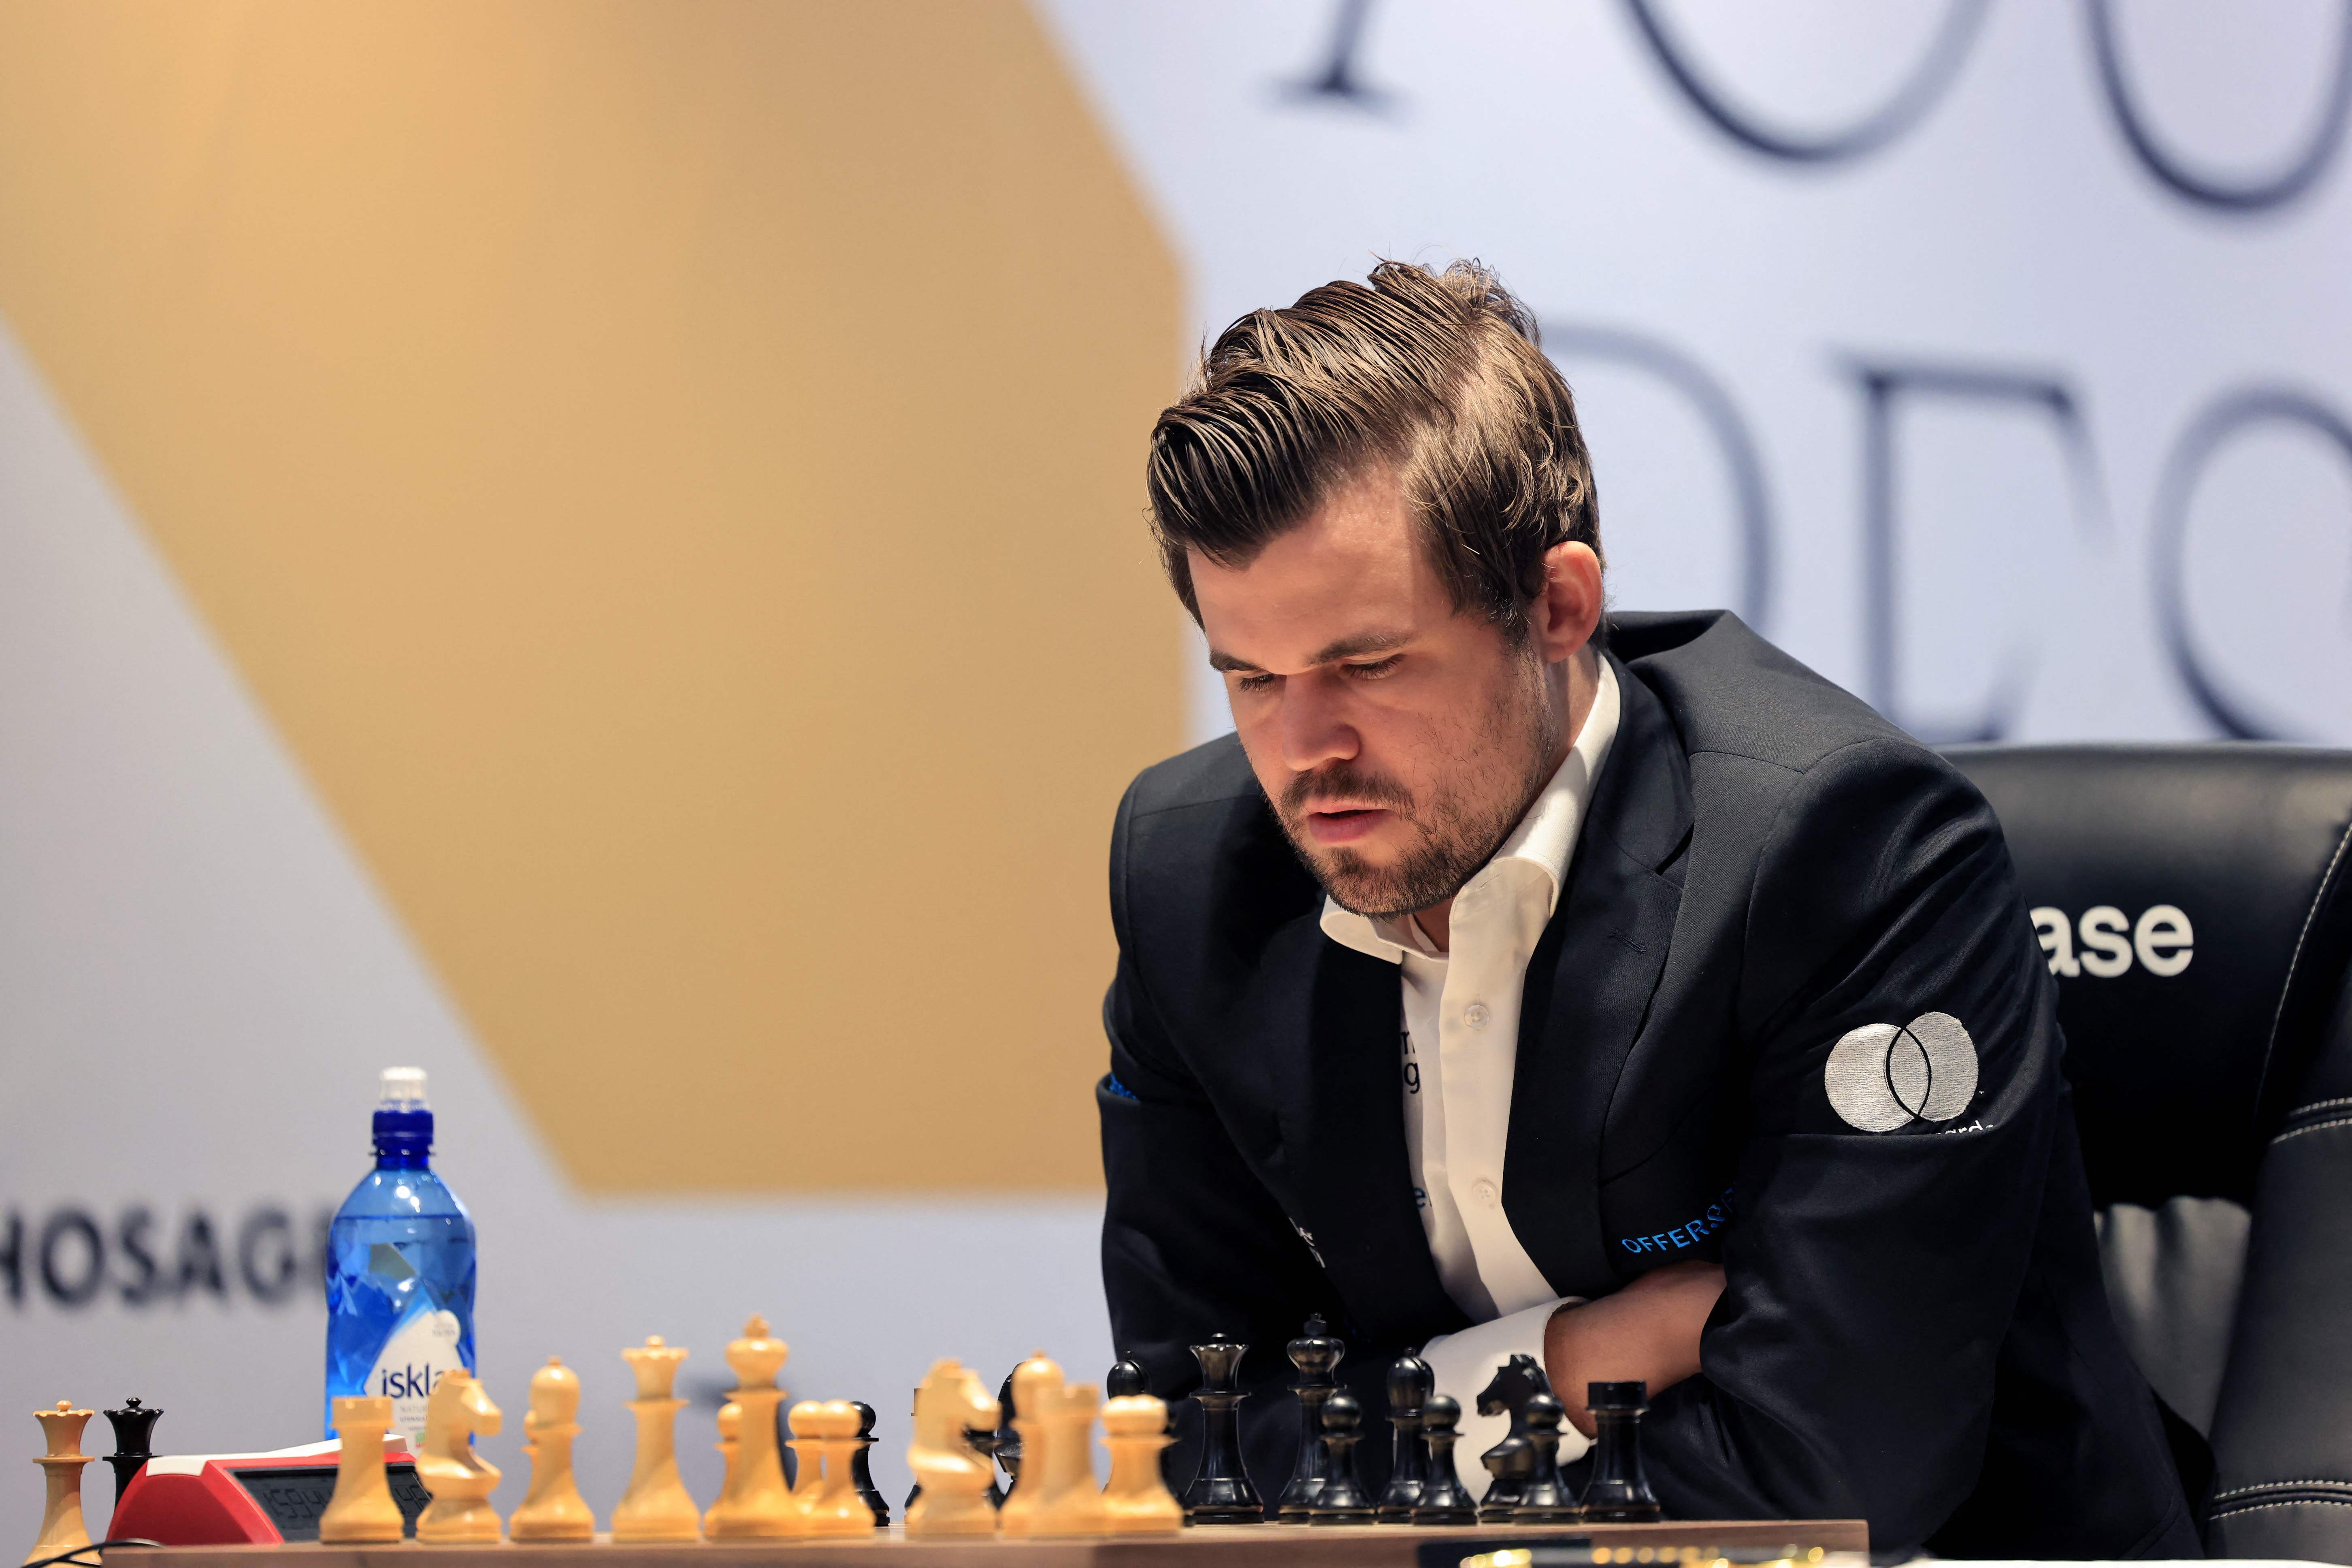 Magnus Carlsen stays king of chess after winning his fifth world